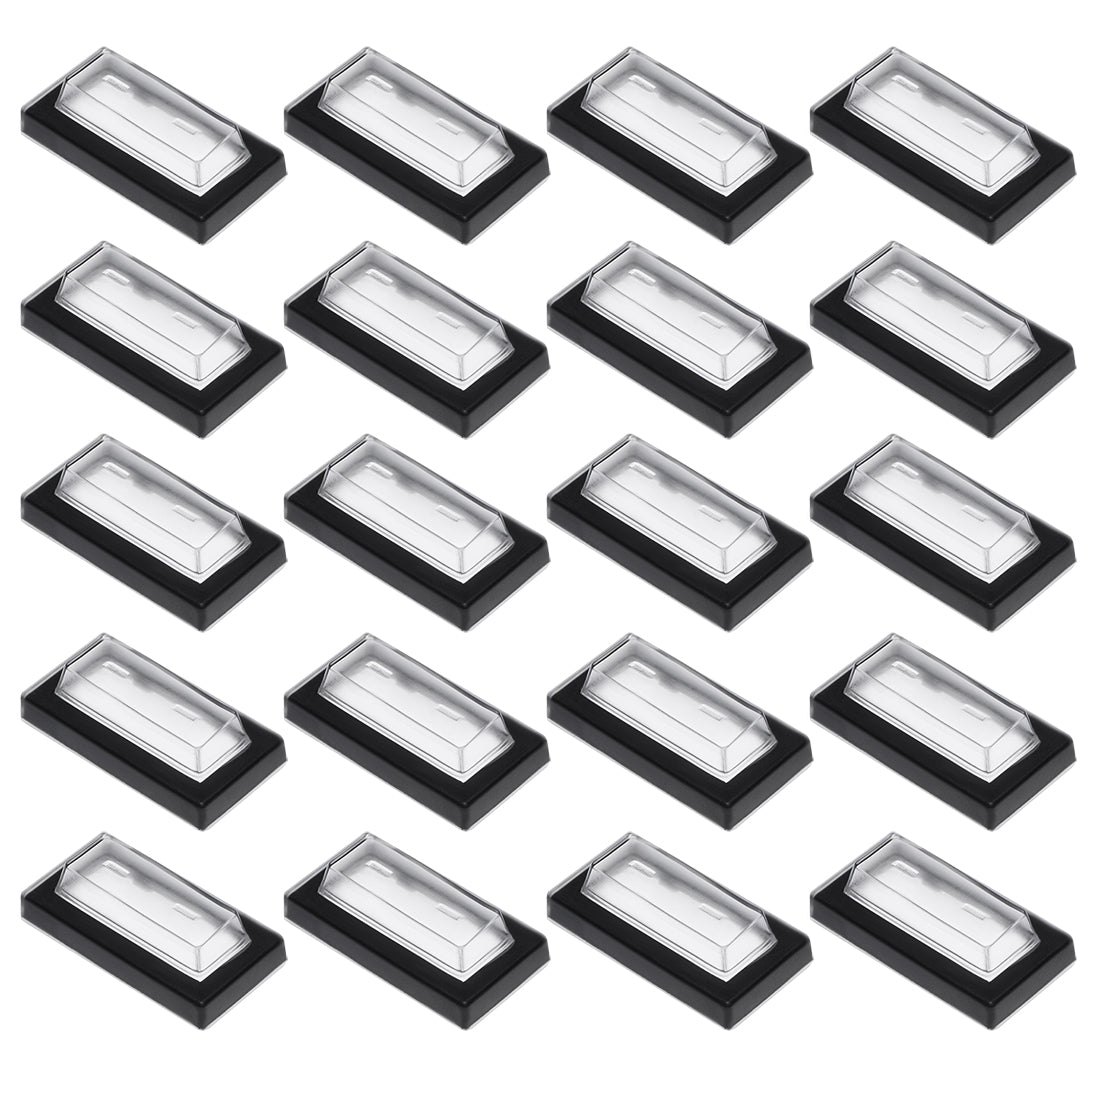 uxcell Uxcell 20pcs Waterproof Case Switch Covers Caps Protector Clear Black Rectangle Splash for Boat Rocker Switch